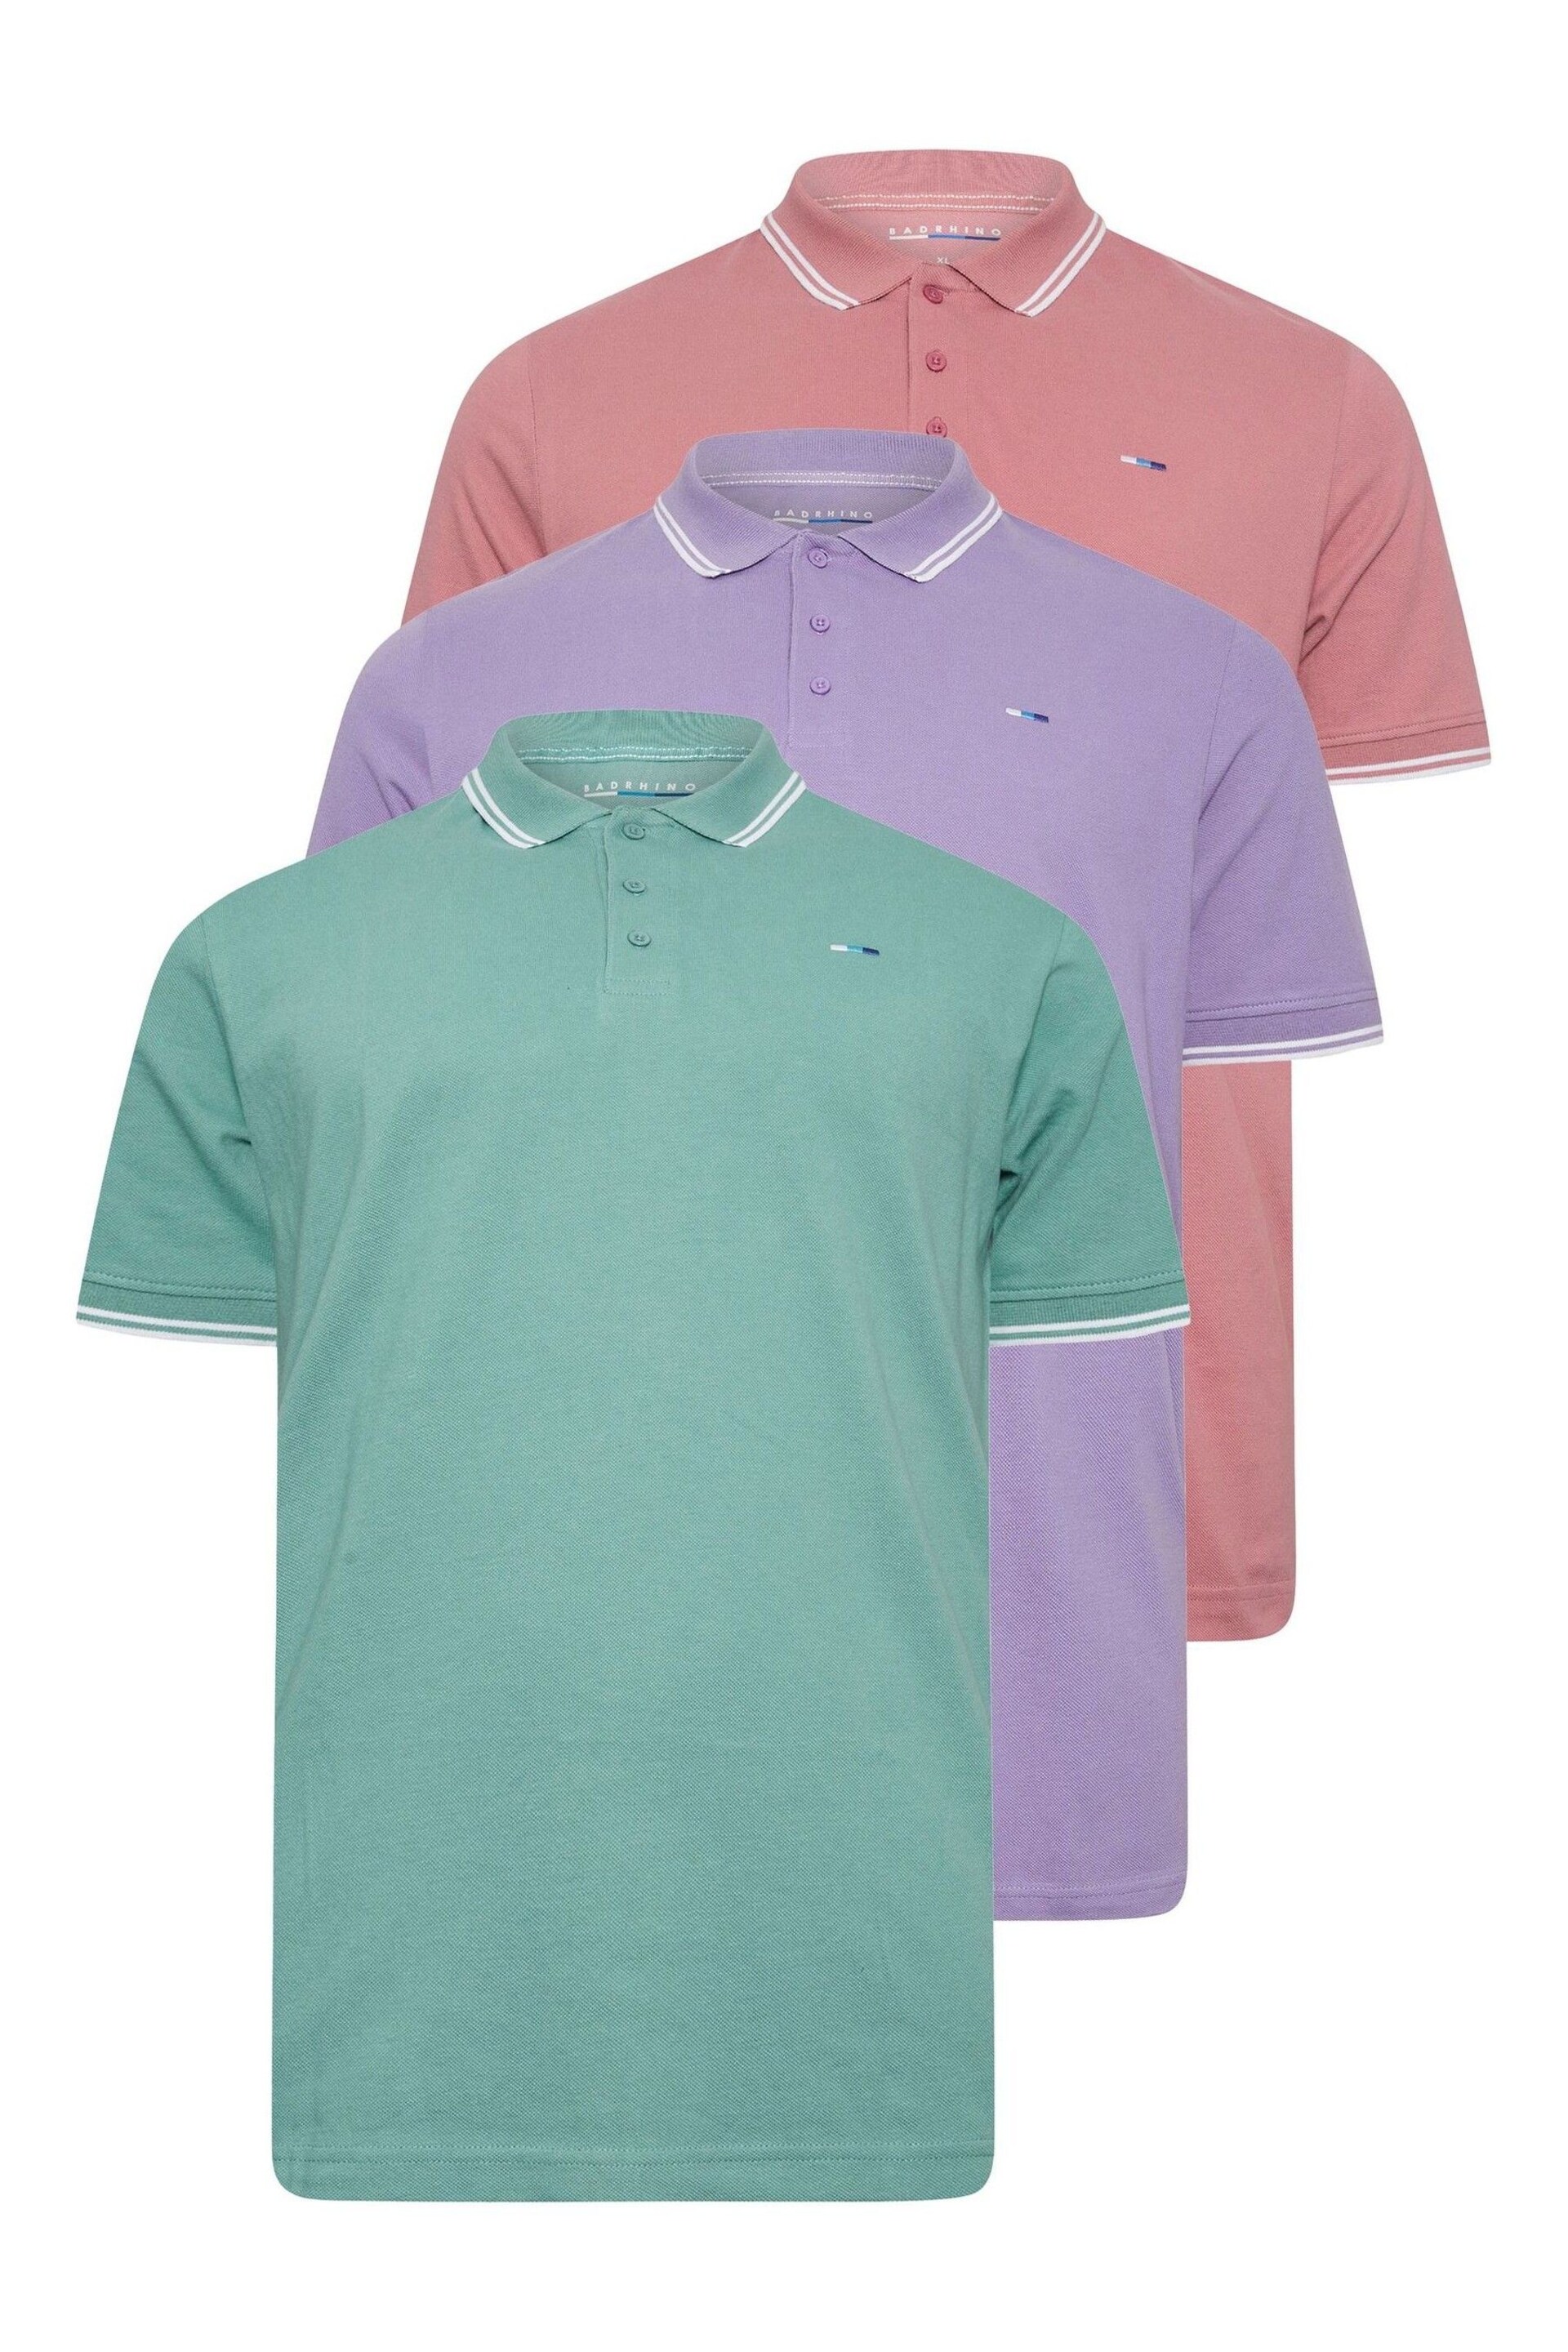 BadRhino Big & Tall Mineral Blue/Rose Pink/Violet Purple 3 Pack Tipped Polo Shirts - Image 4 of 7